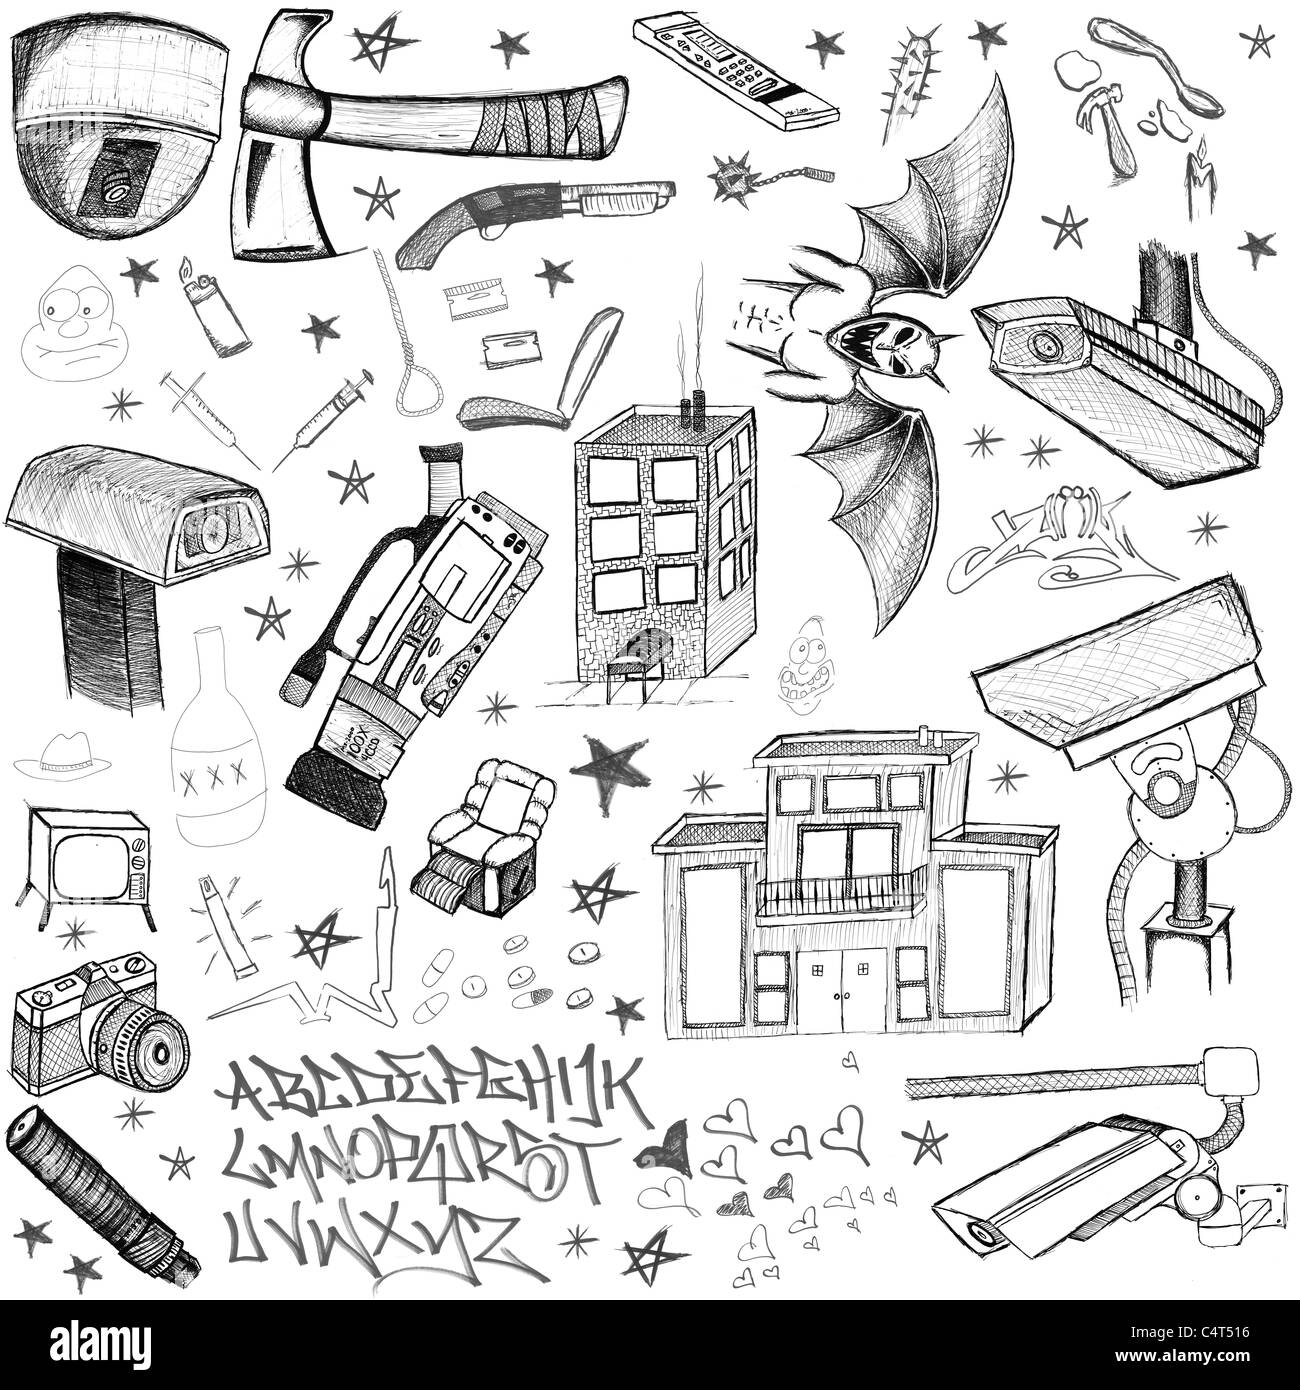 hand drawn doodles design elements scetch scribbles drawing Stock Photo